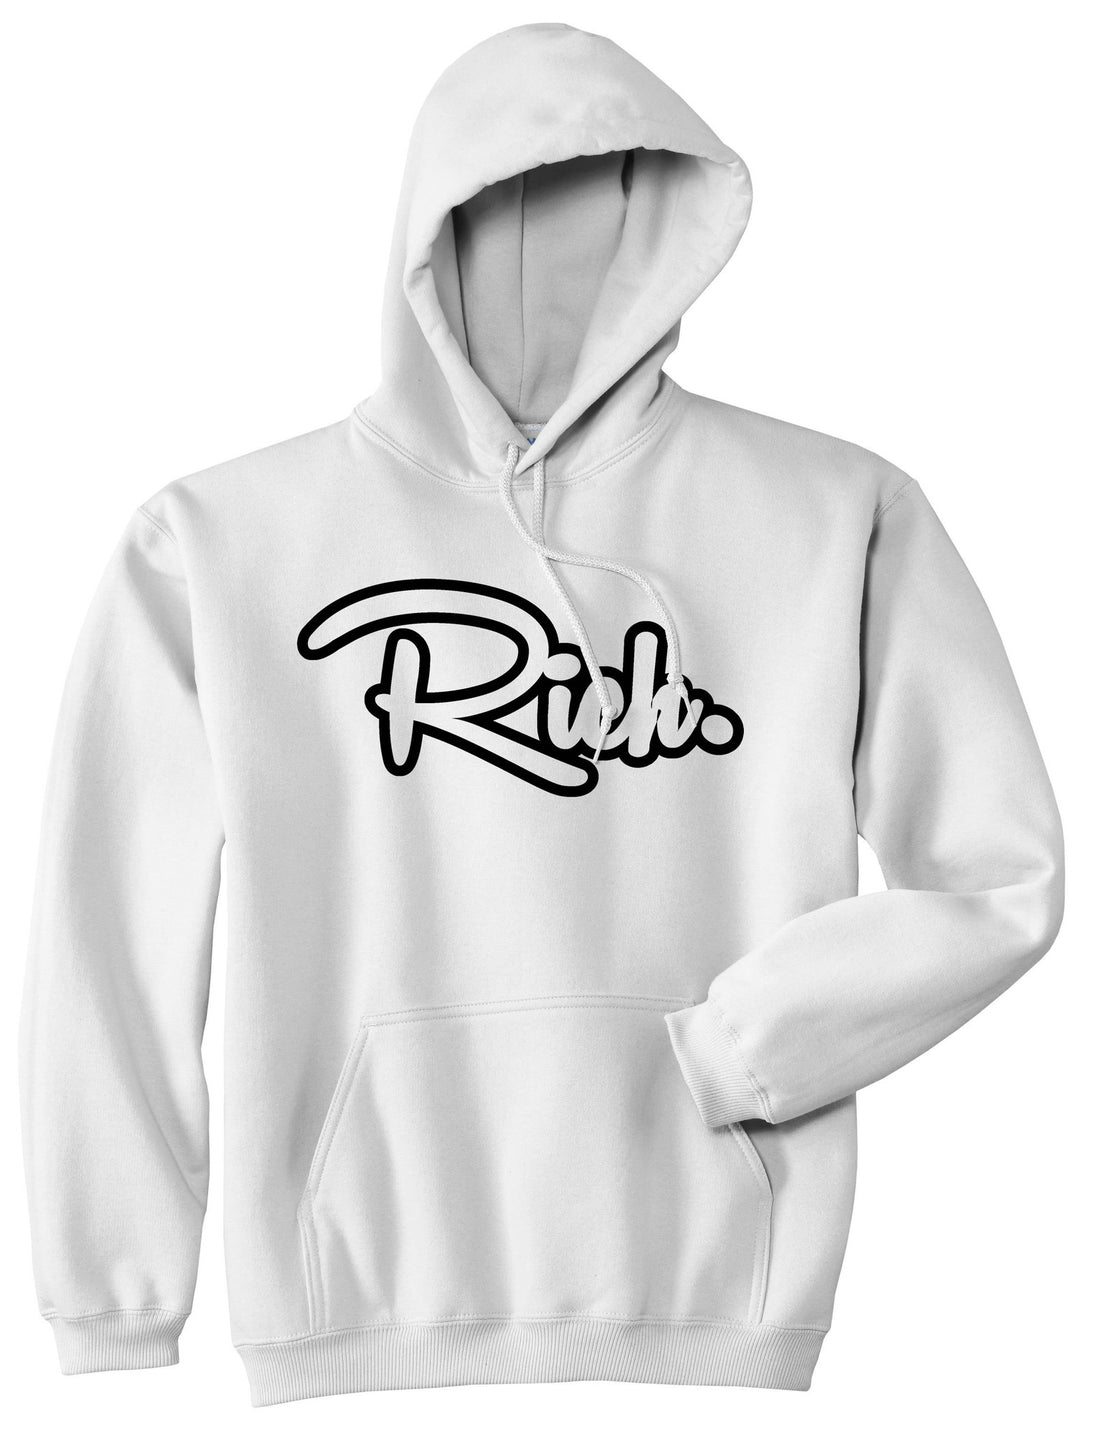 Rich Money Fab Style New York Richie NYC Boys Kids Pullover Hoodie Hoody in White by Kings Of NY